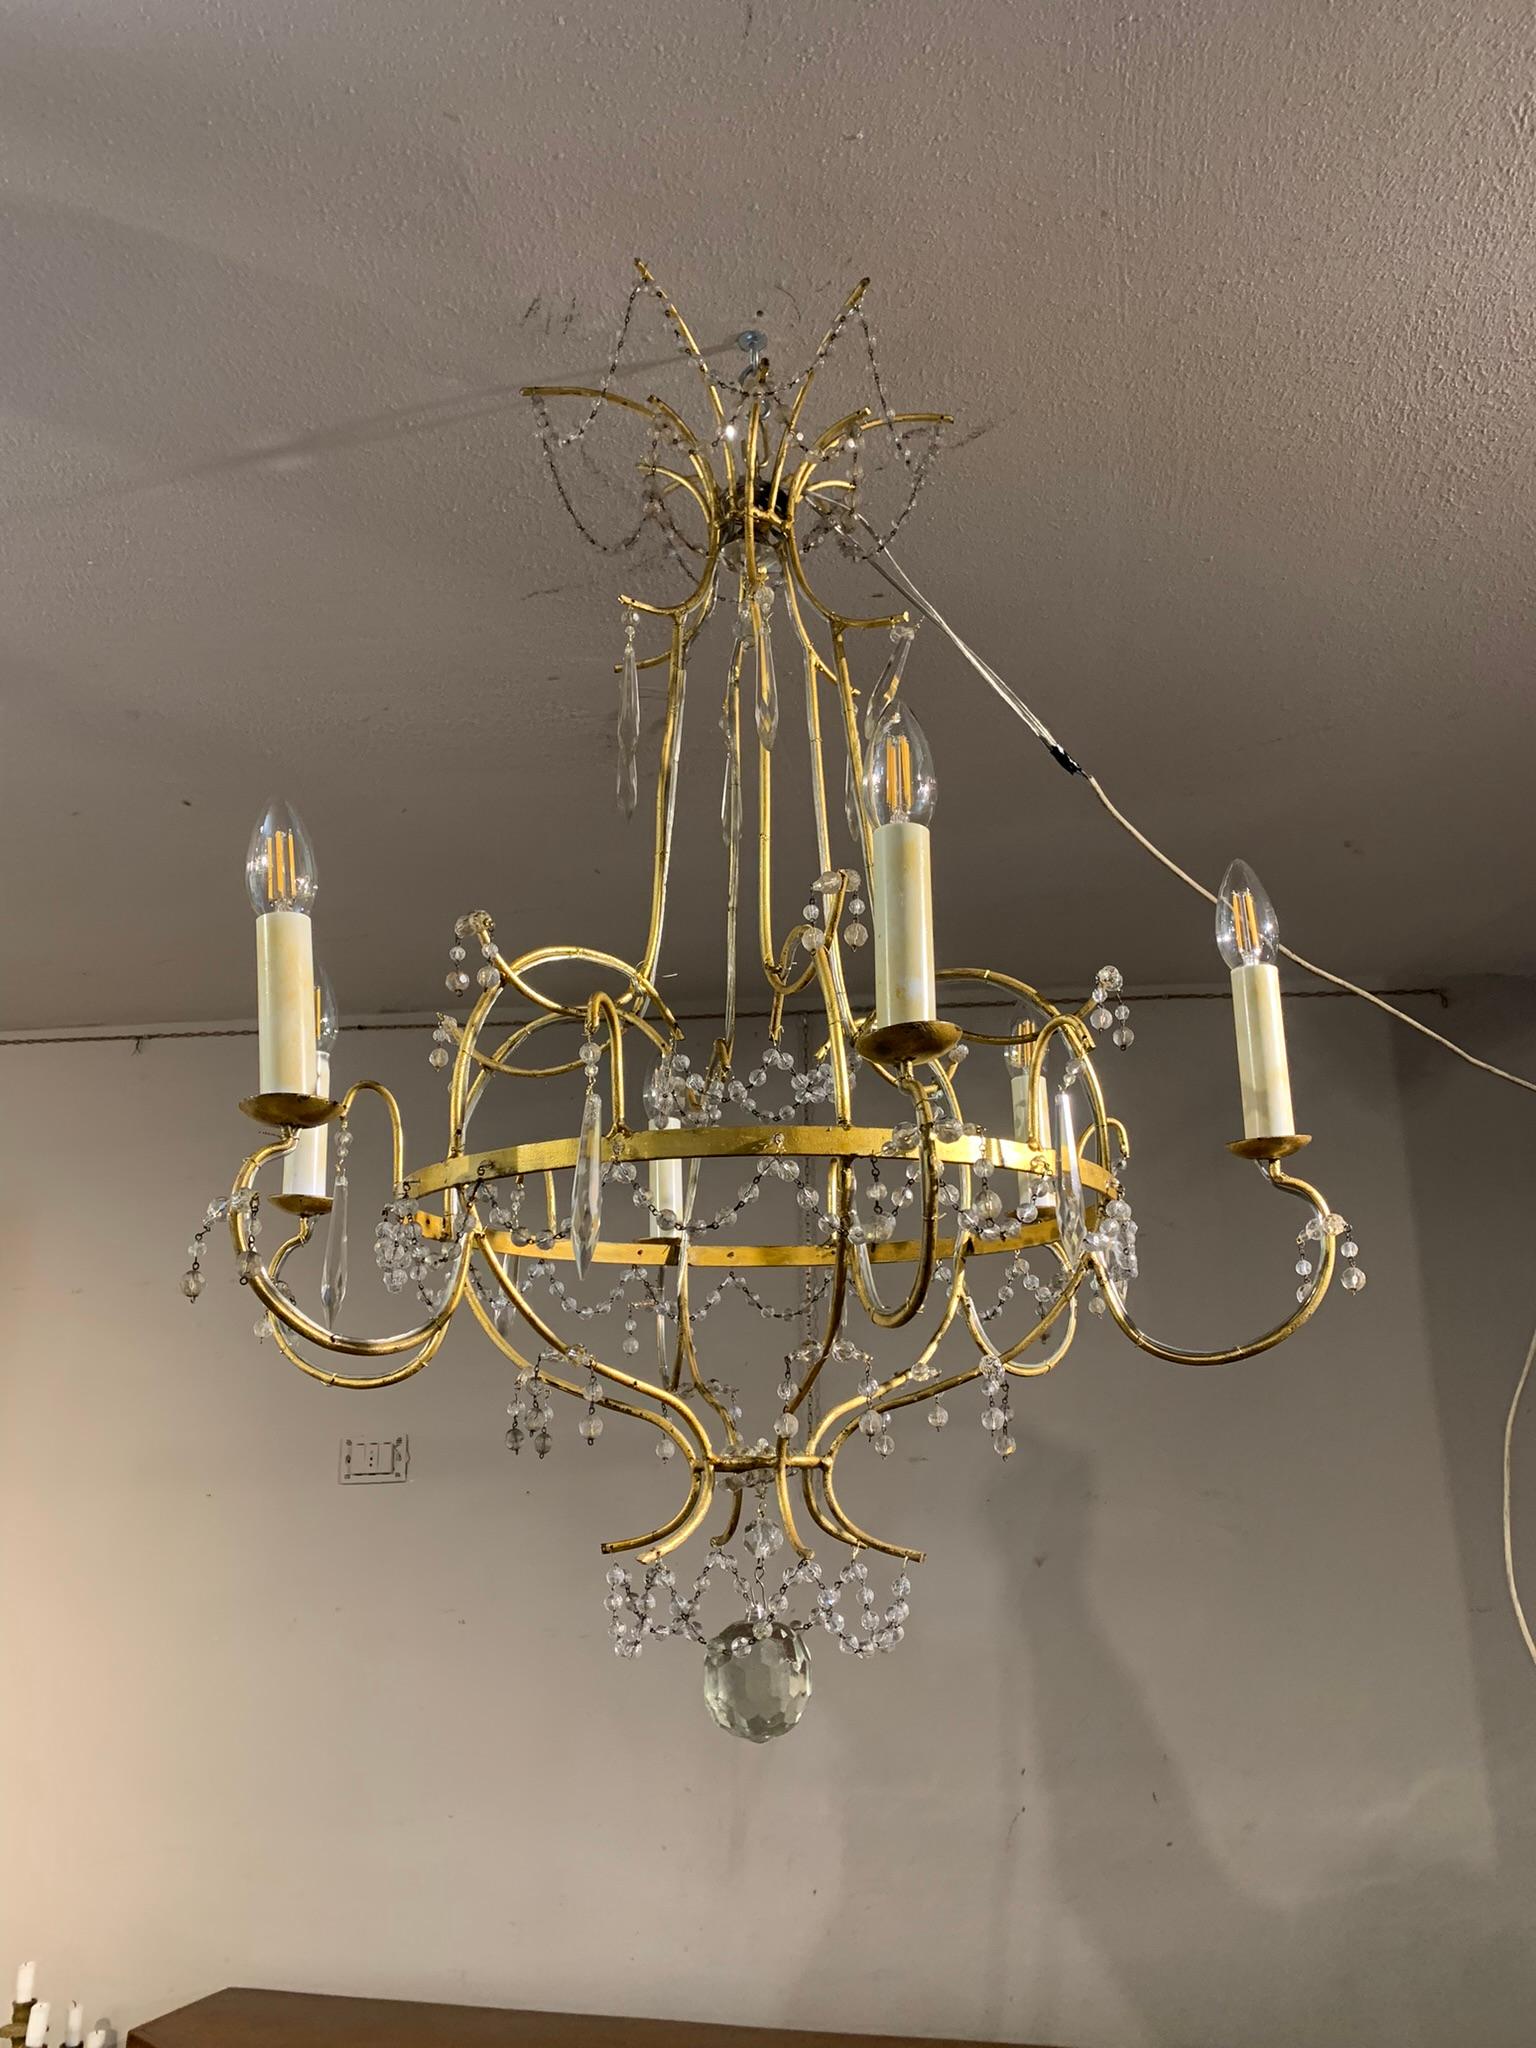 MID 18th CENTURY MARIA TERESA CHANDELIER For Sale 4